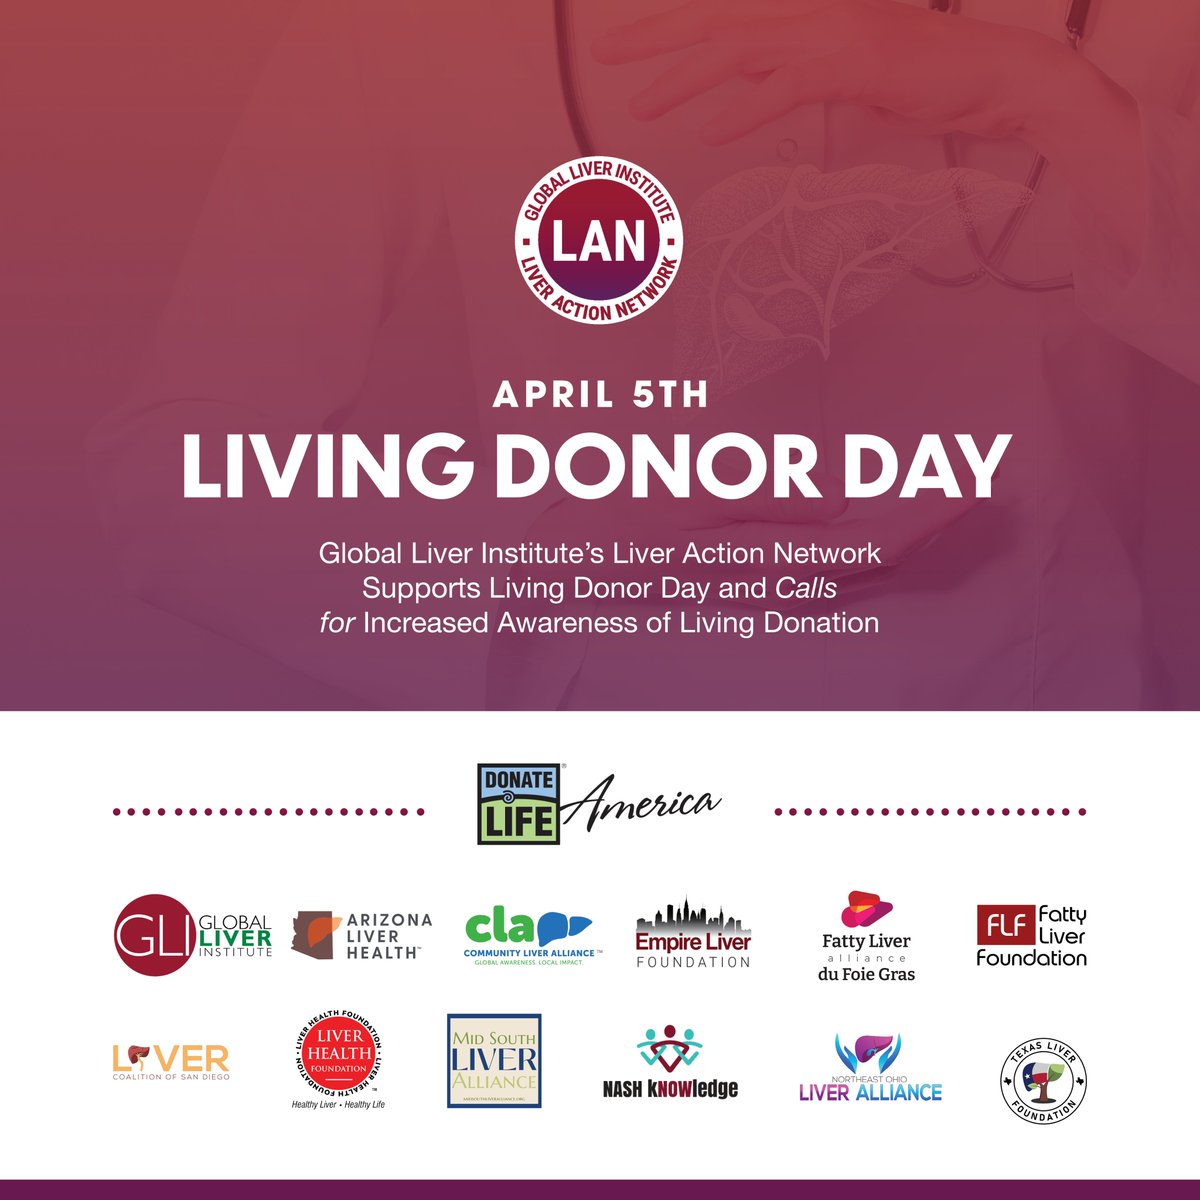 Liver Health Foundation, along with Global Liver Institute’s Liver Action Network's members, support #LivingDonorDay.  We ask our local CA and national governments to enact policies to help eliminate barriers for #livingdonors and recipients 
#DonateLife #OrganDonation #chla